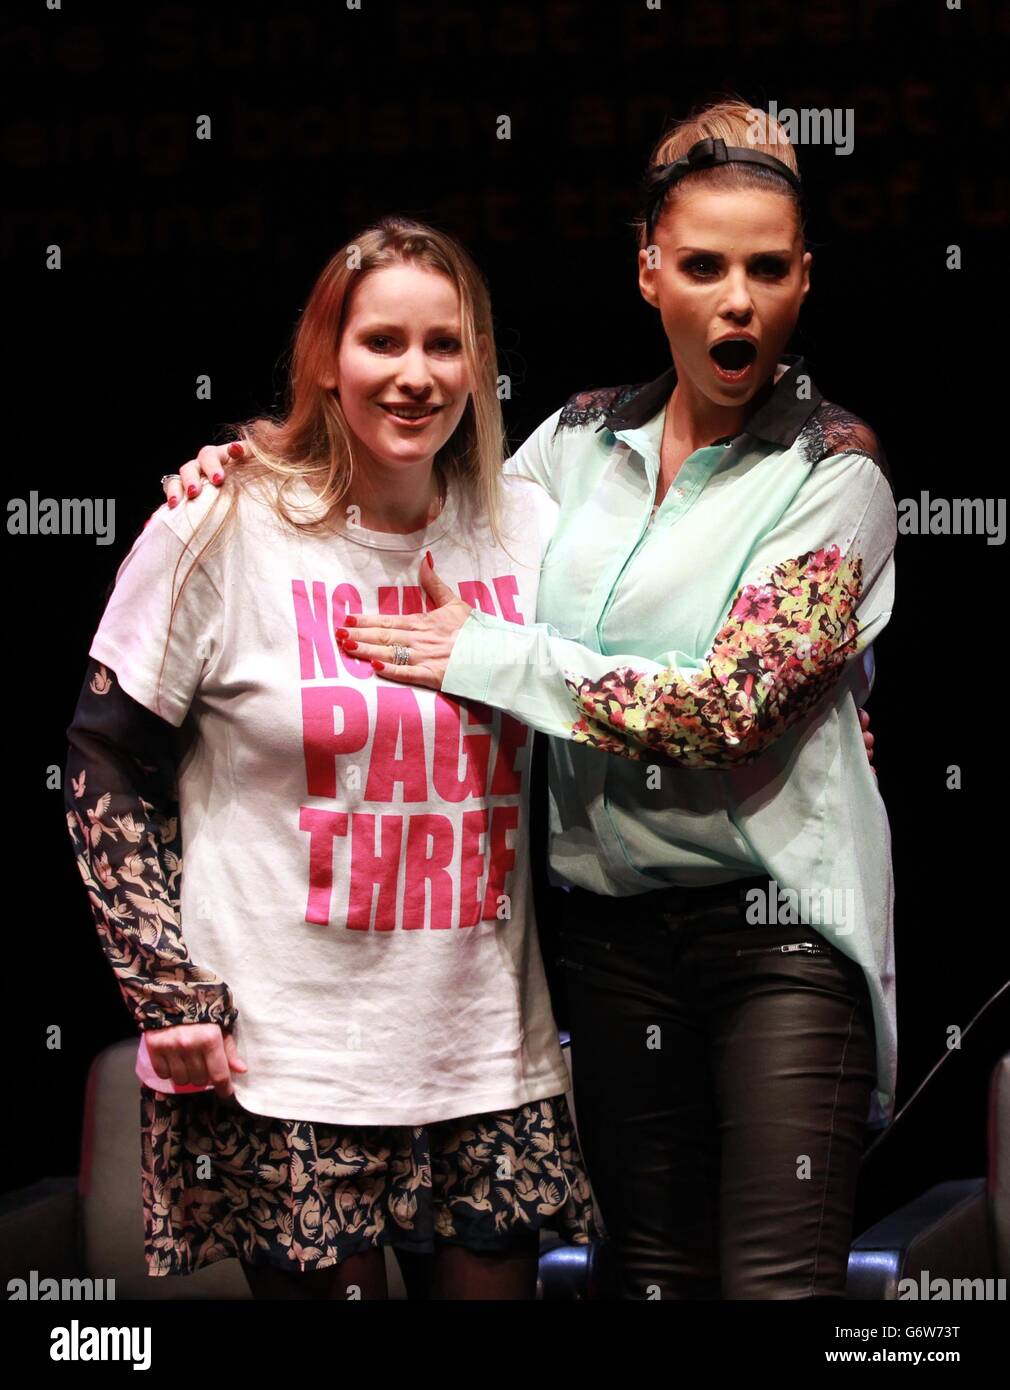 Katie Price (right) with Everyday Sexism founder Laura Bates (left) at a 'Does Page 3 Make the World a Better Place' panel discussion during the Women of the World Festival (WoW) at the Southbank Centre, London. Stock Photo